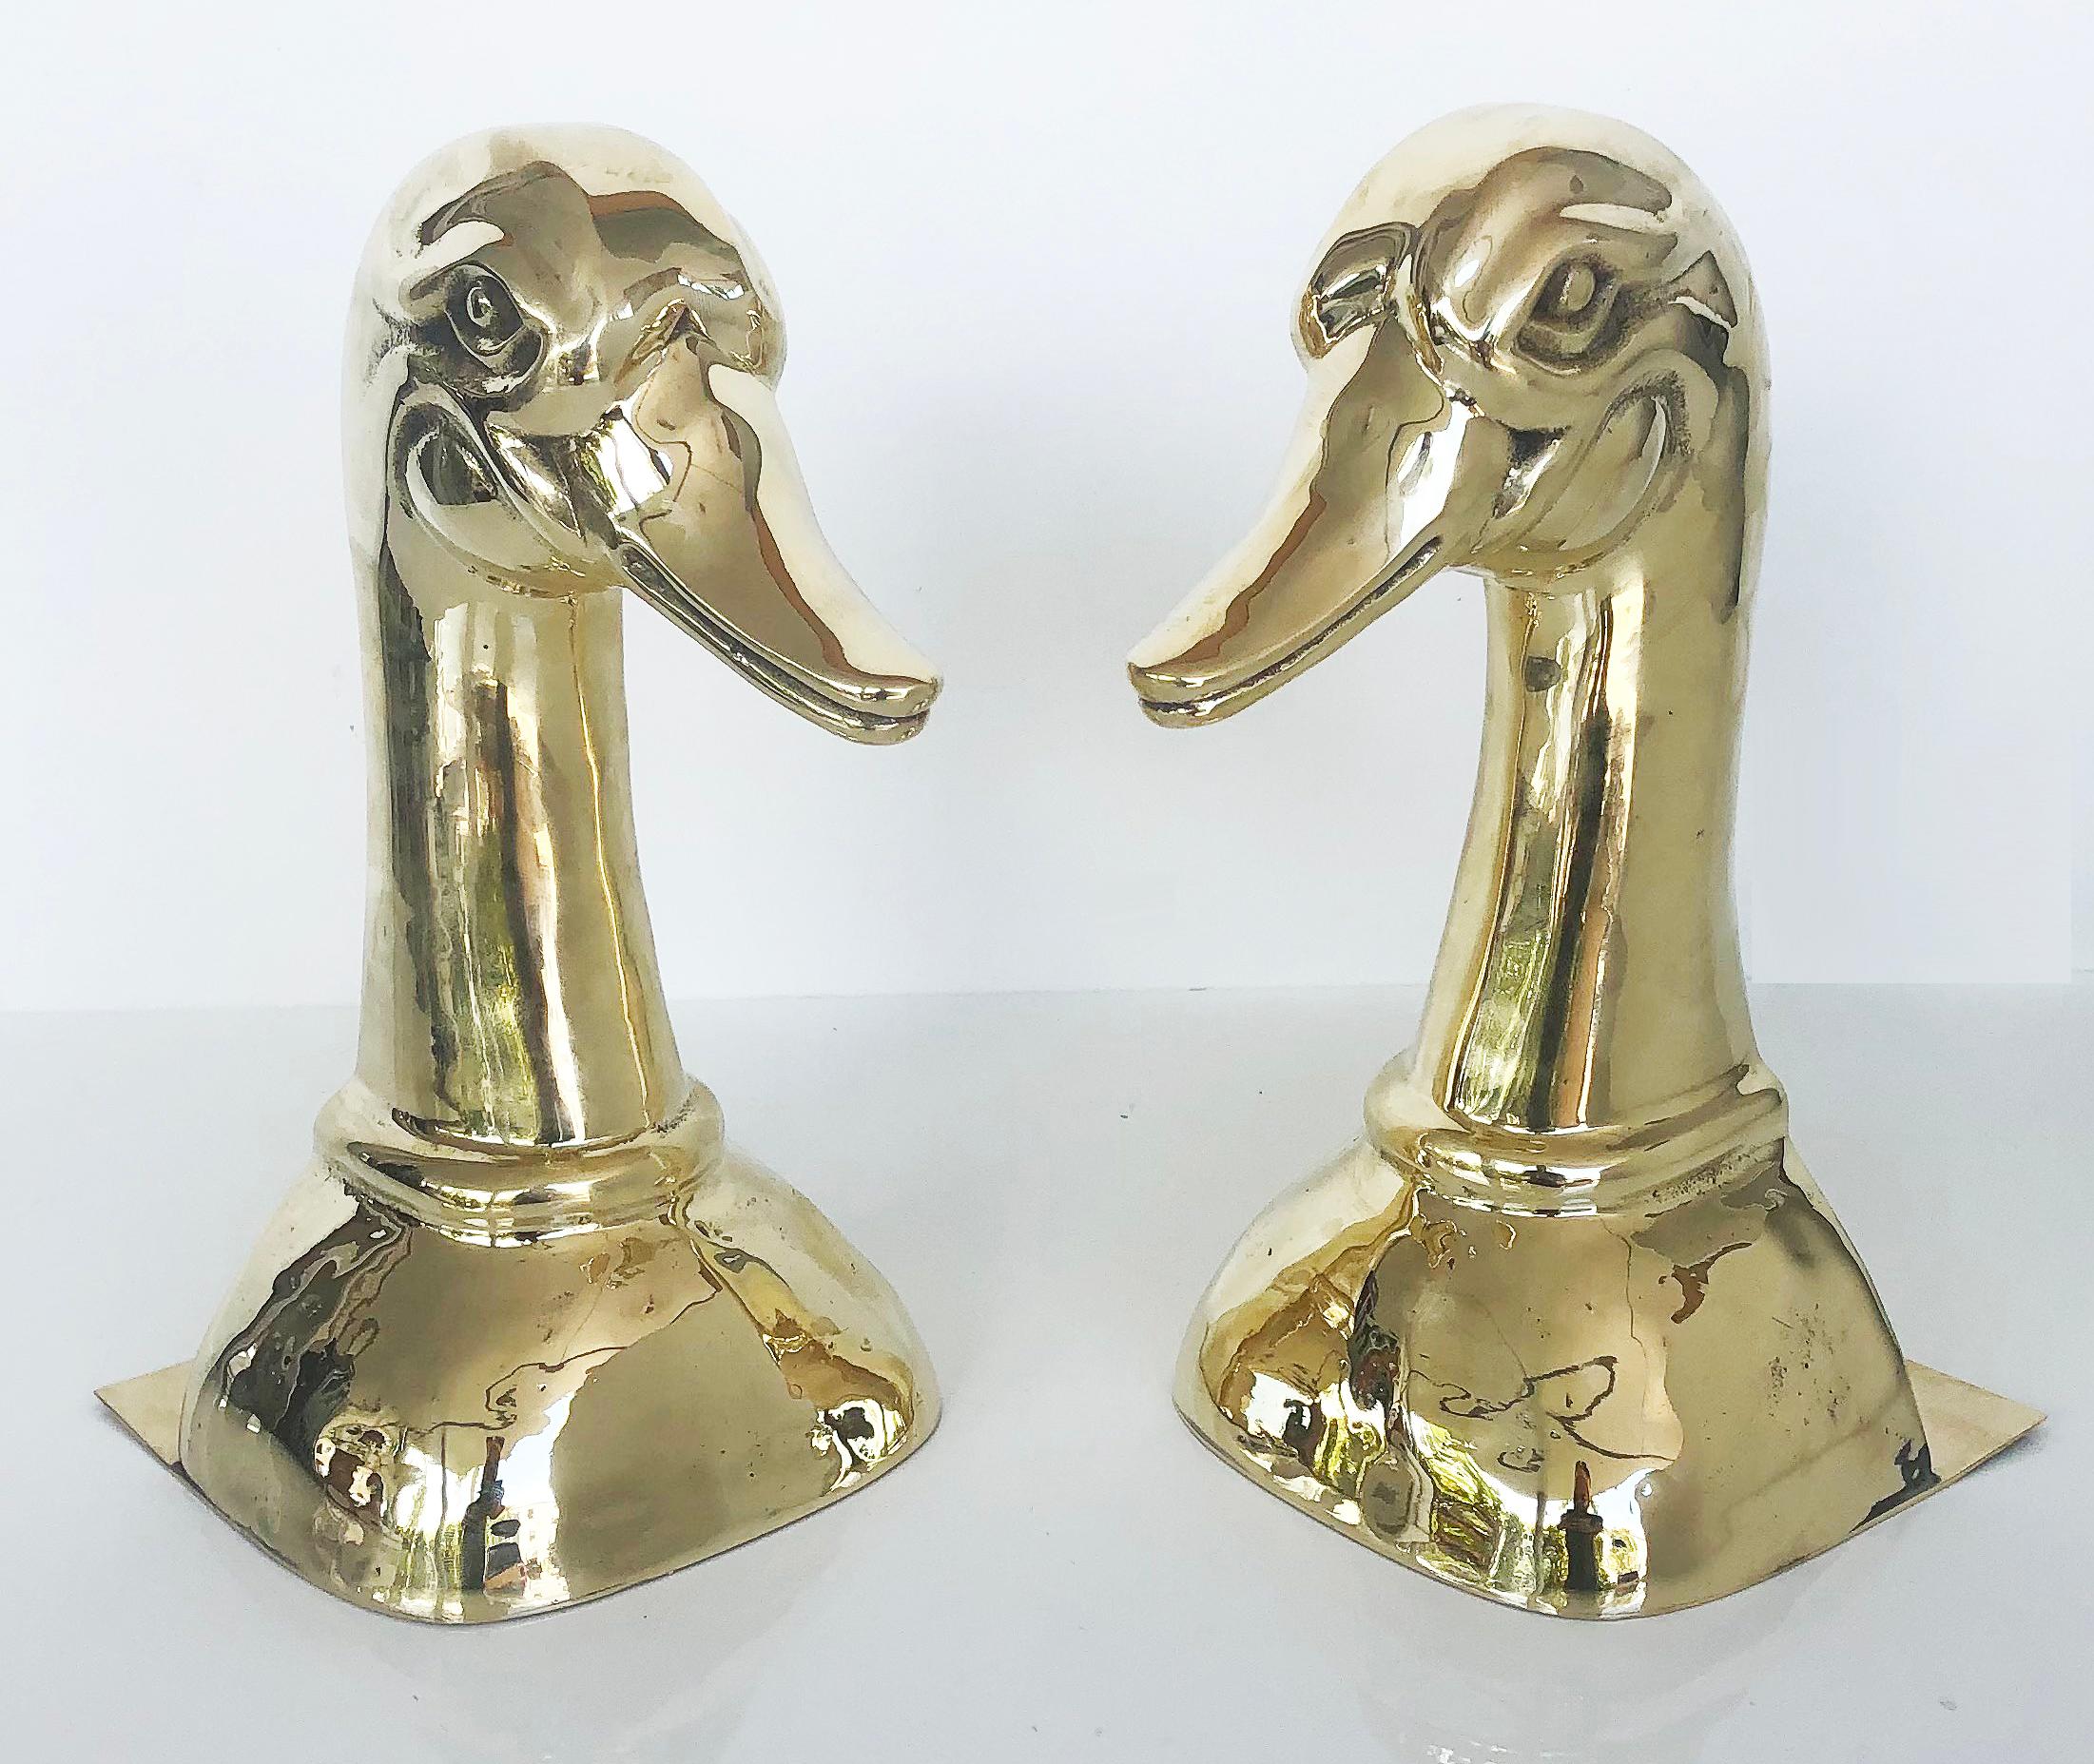 Vintage Polished Brass Duck Head Bookends, Pair For Sale 1